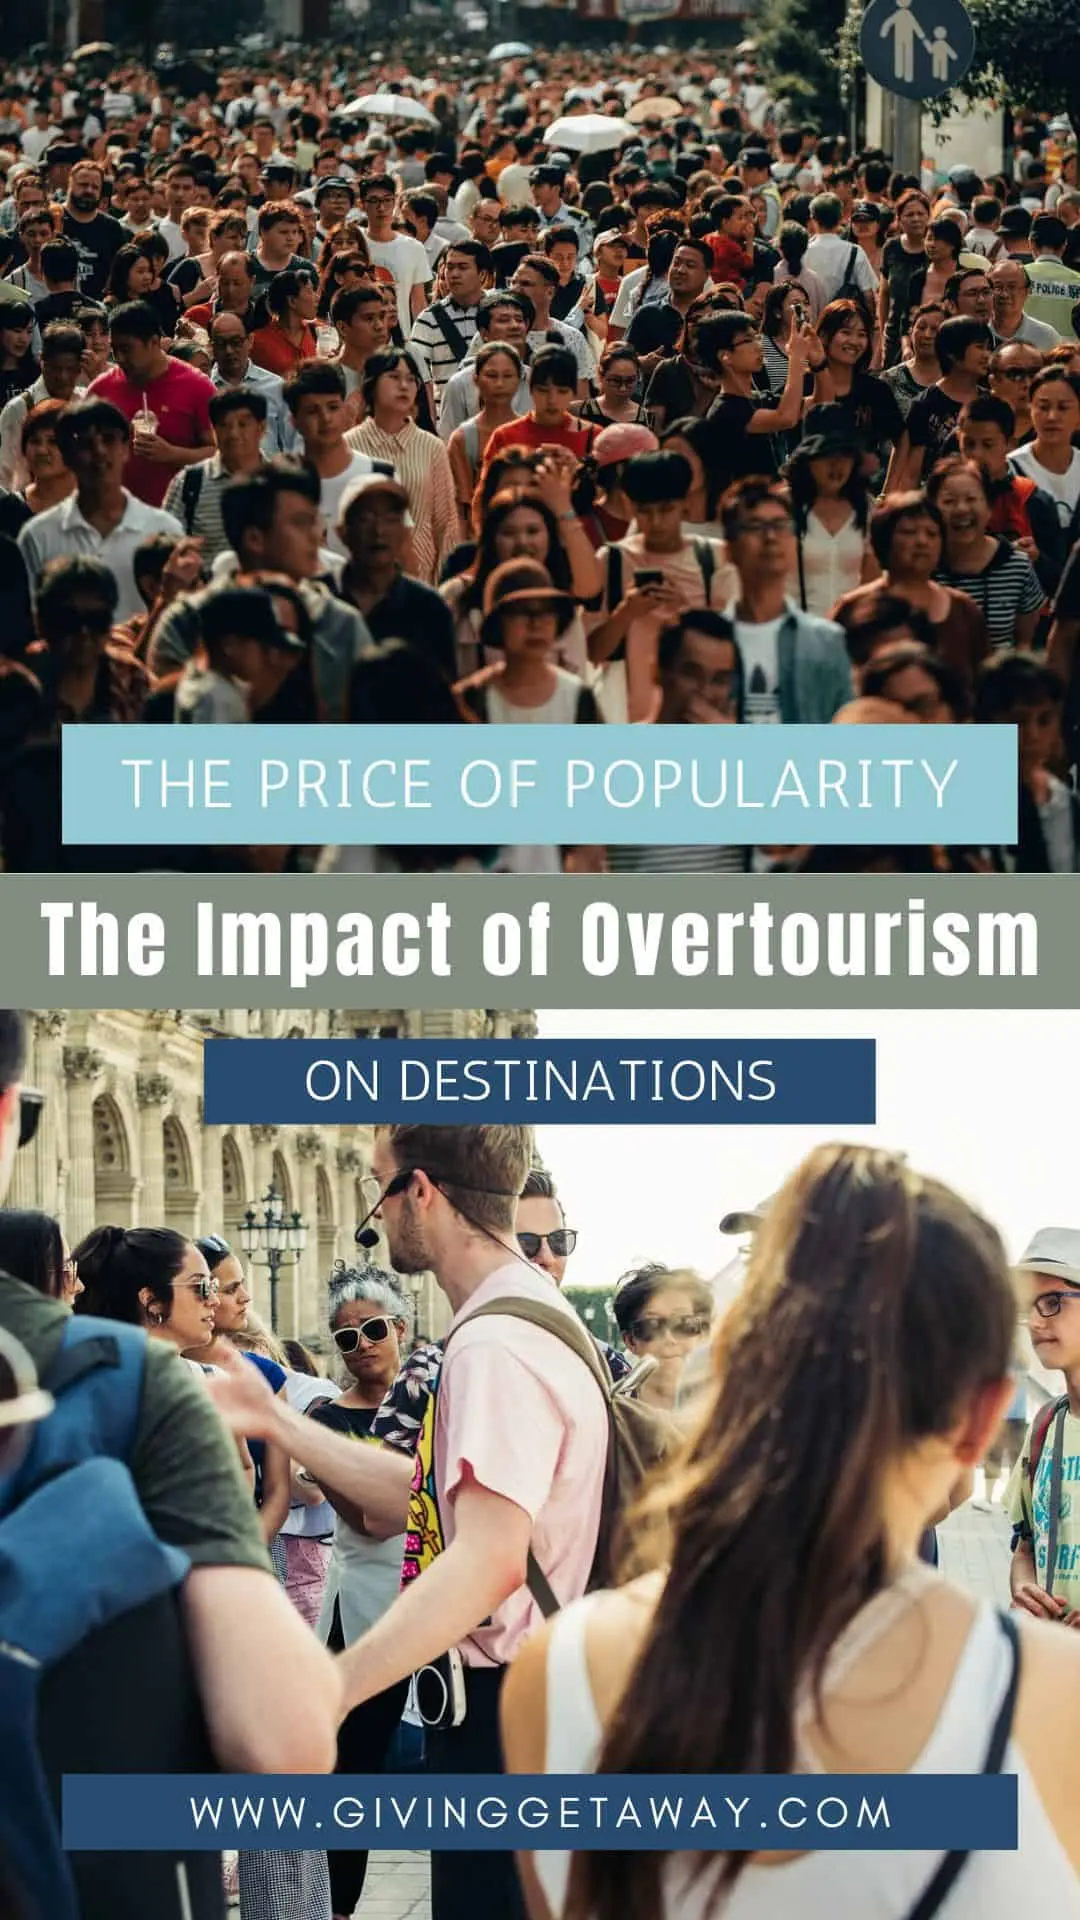 The Price of Popularity: The Impact of Overtourism on Destinations